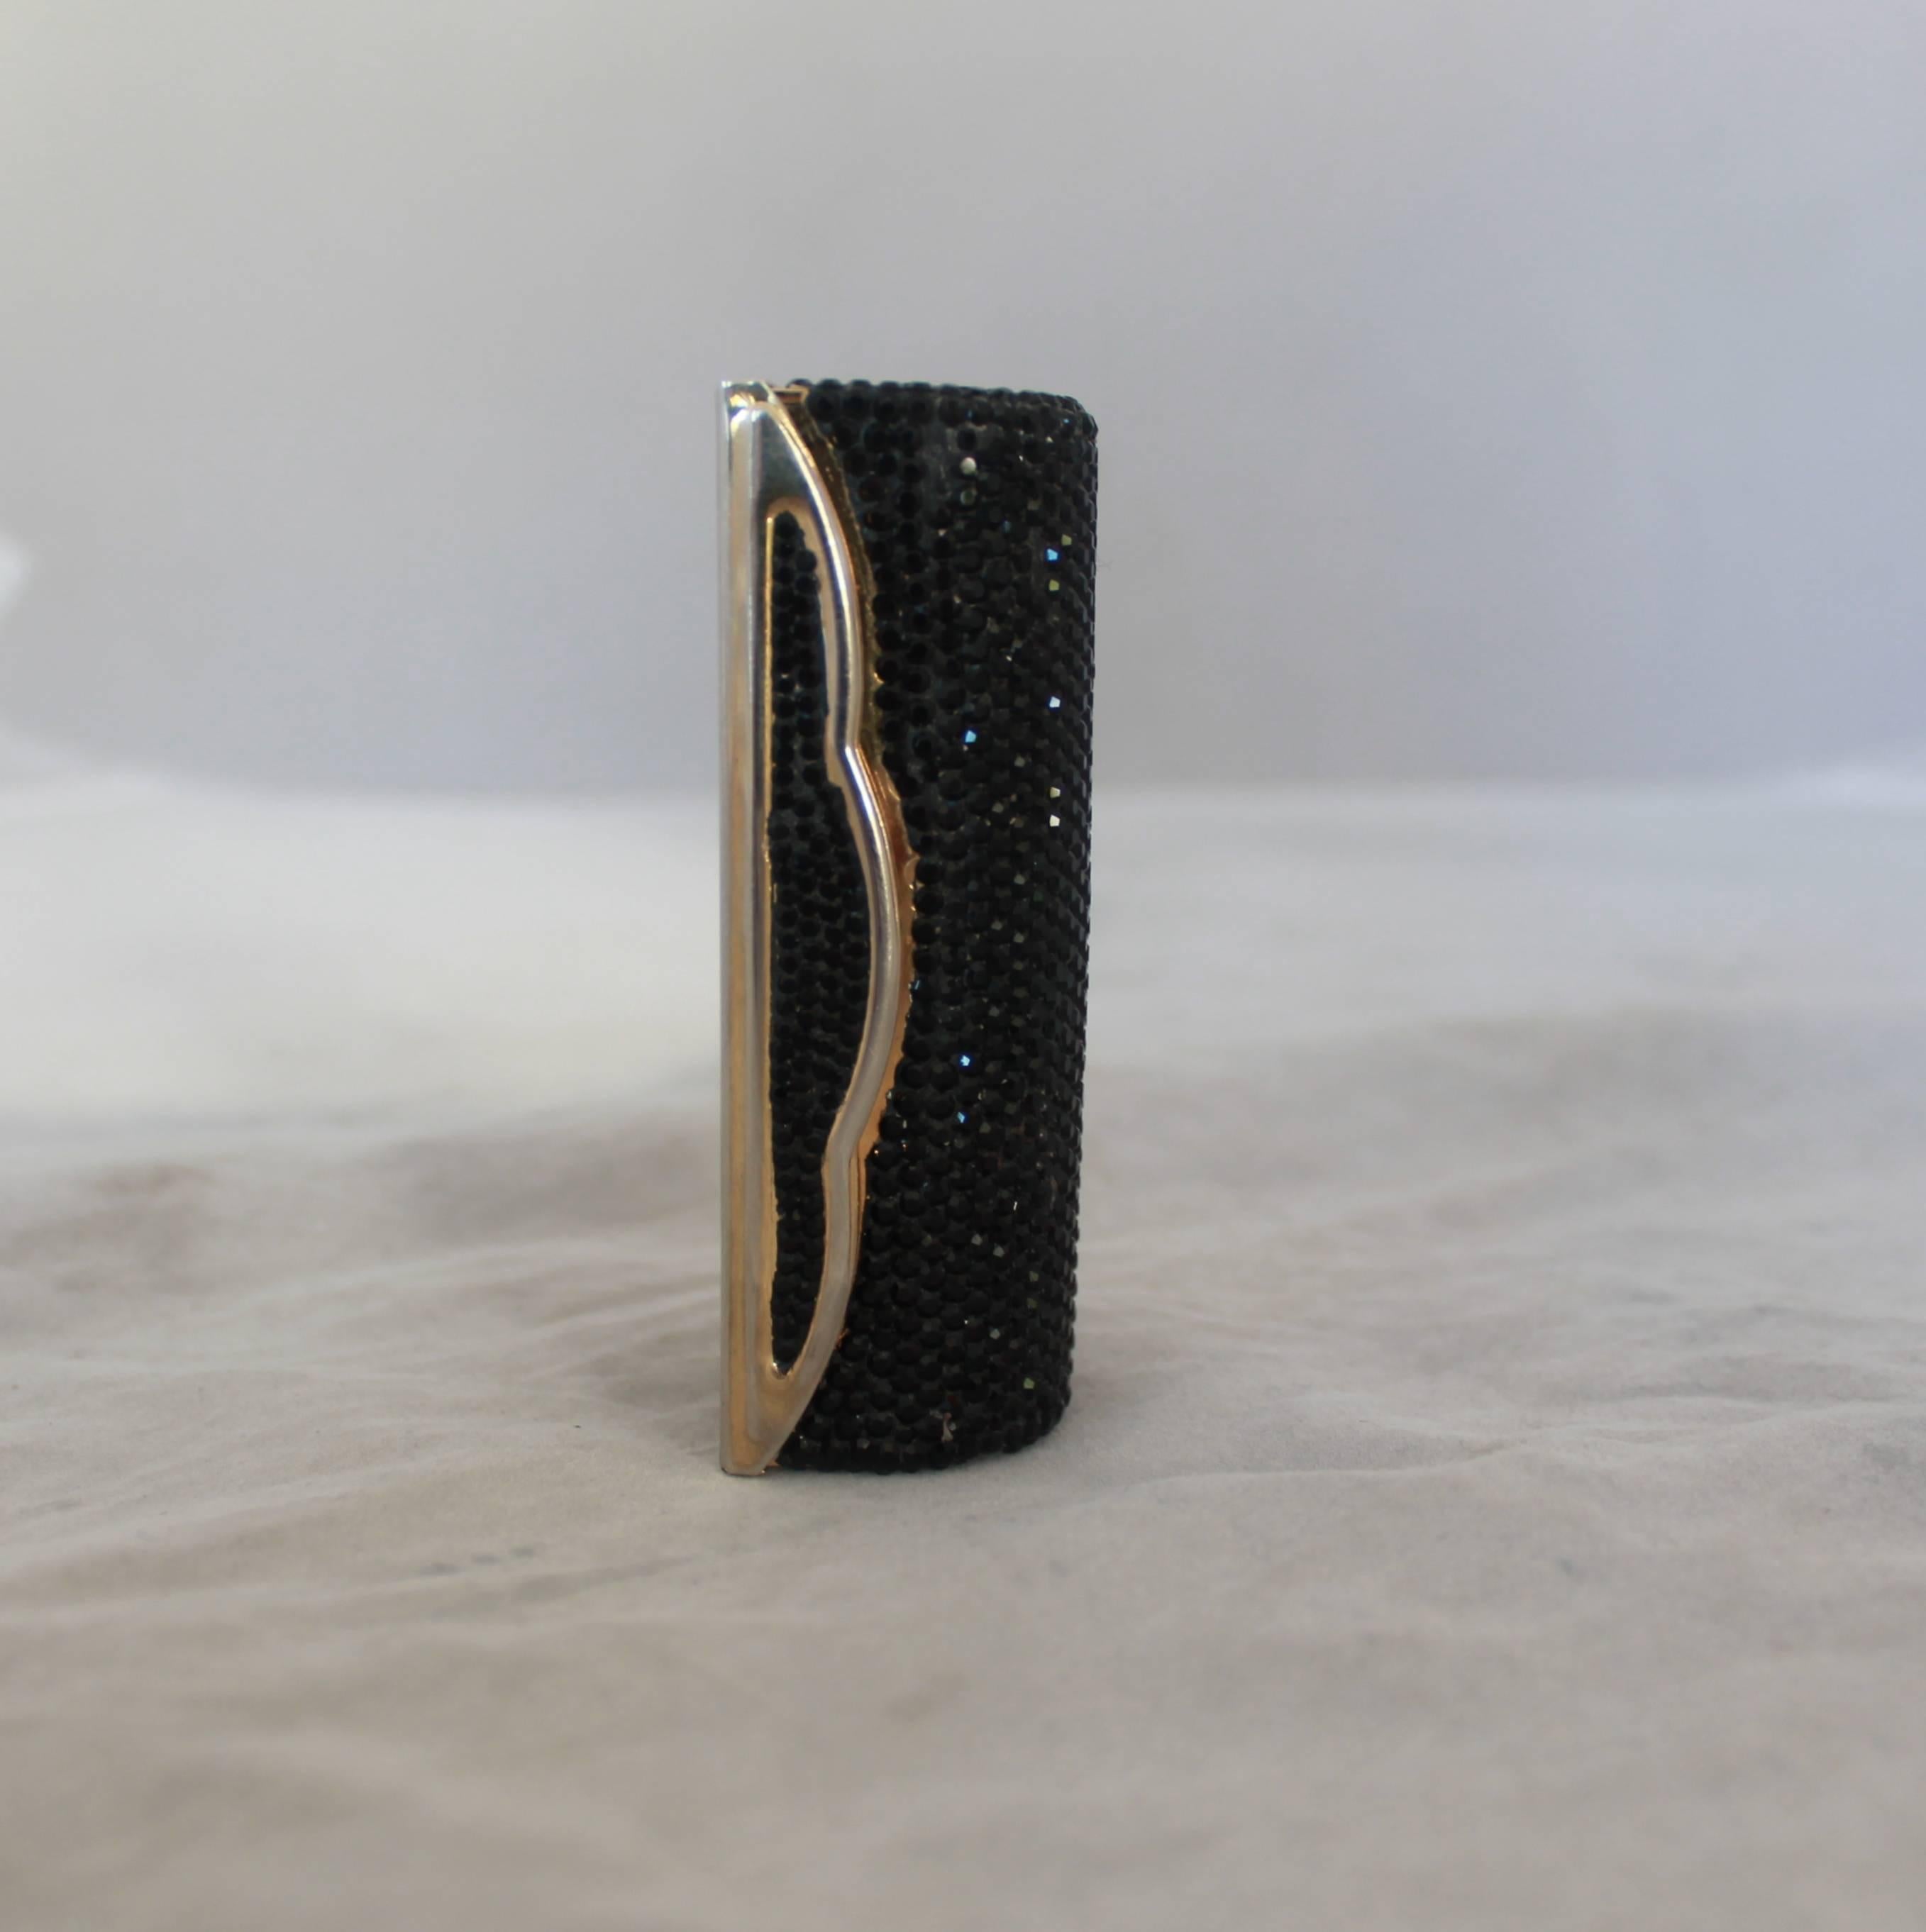 Judith Leiber Vintage Black Rhinestone Lipstick Case

This Lipstick Case is in good vintage condition with some missing rhinestones and the gold trim losing its shine. 

Measurements:

Height - 1.25